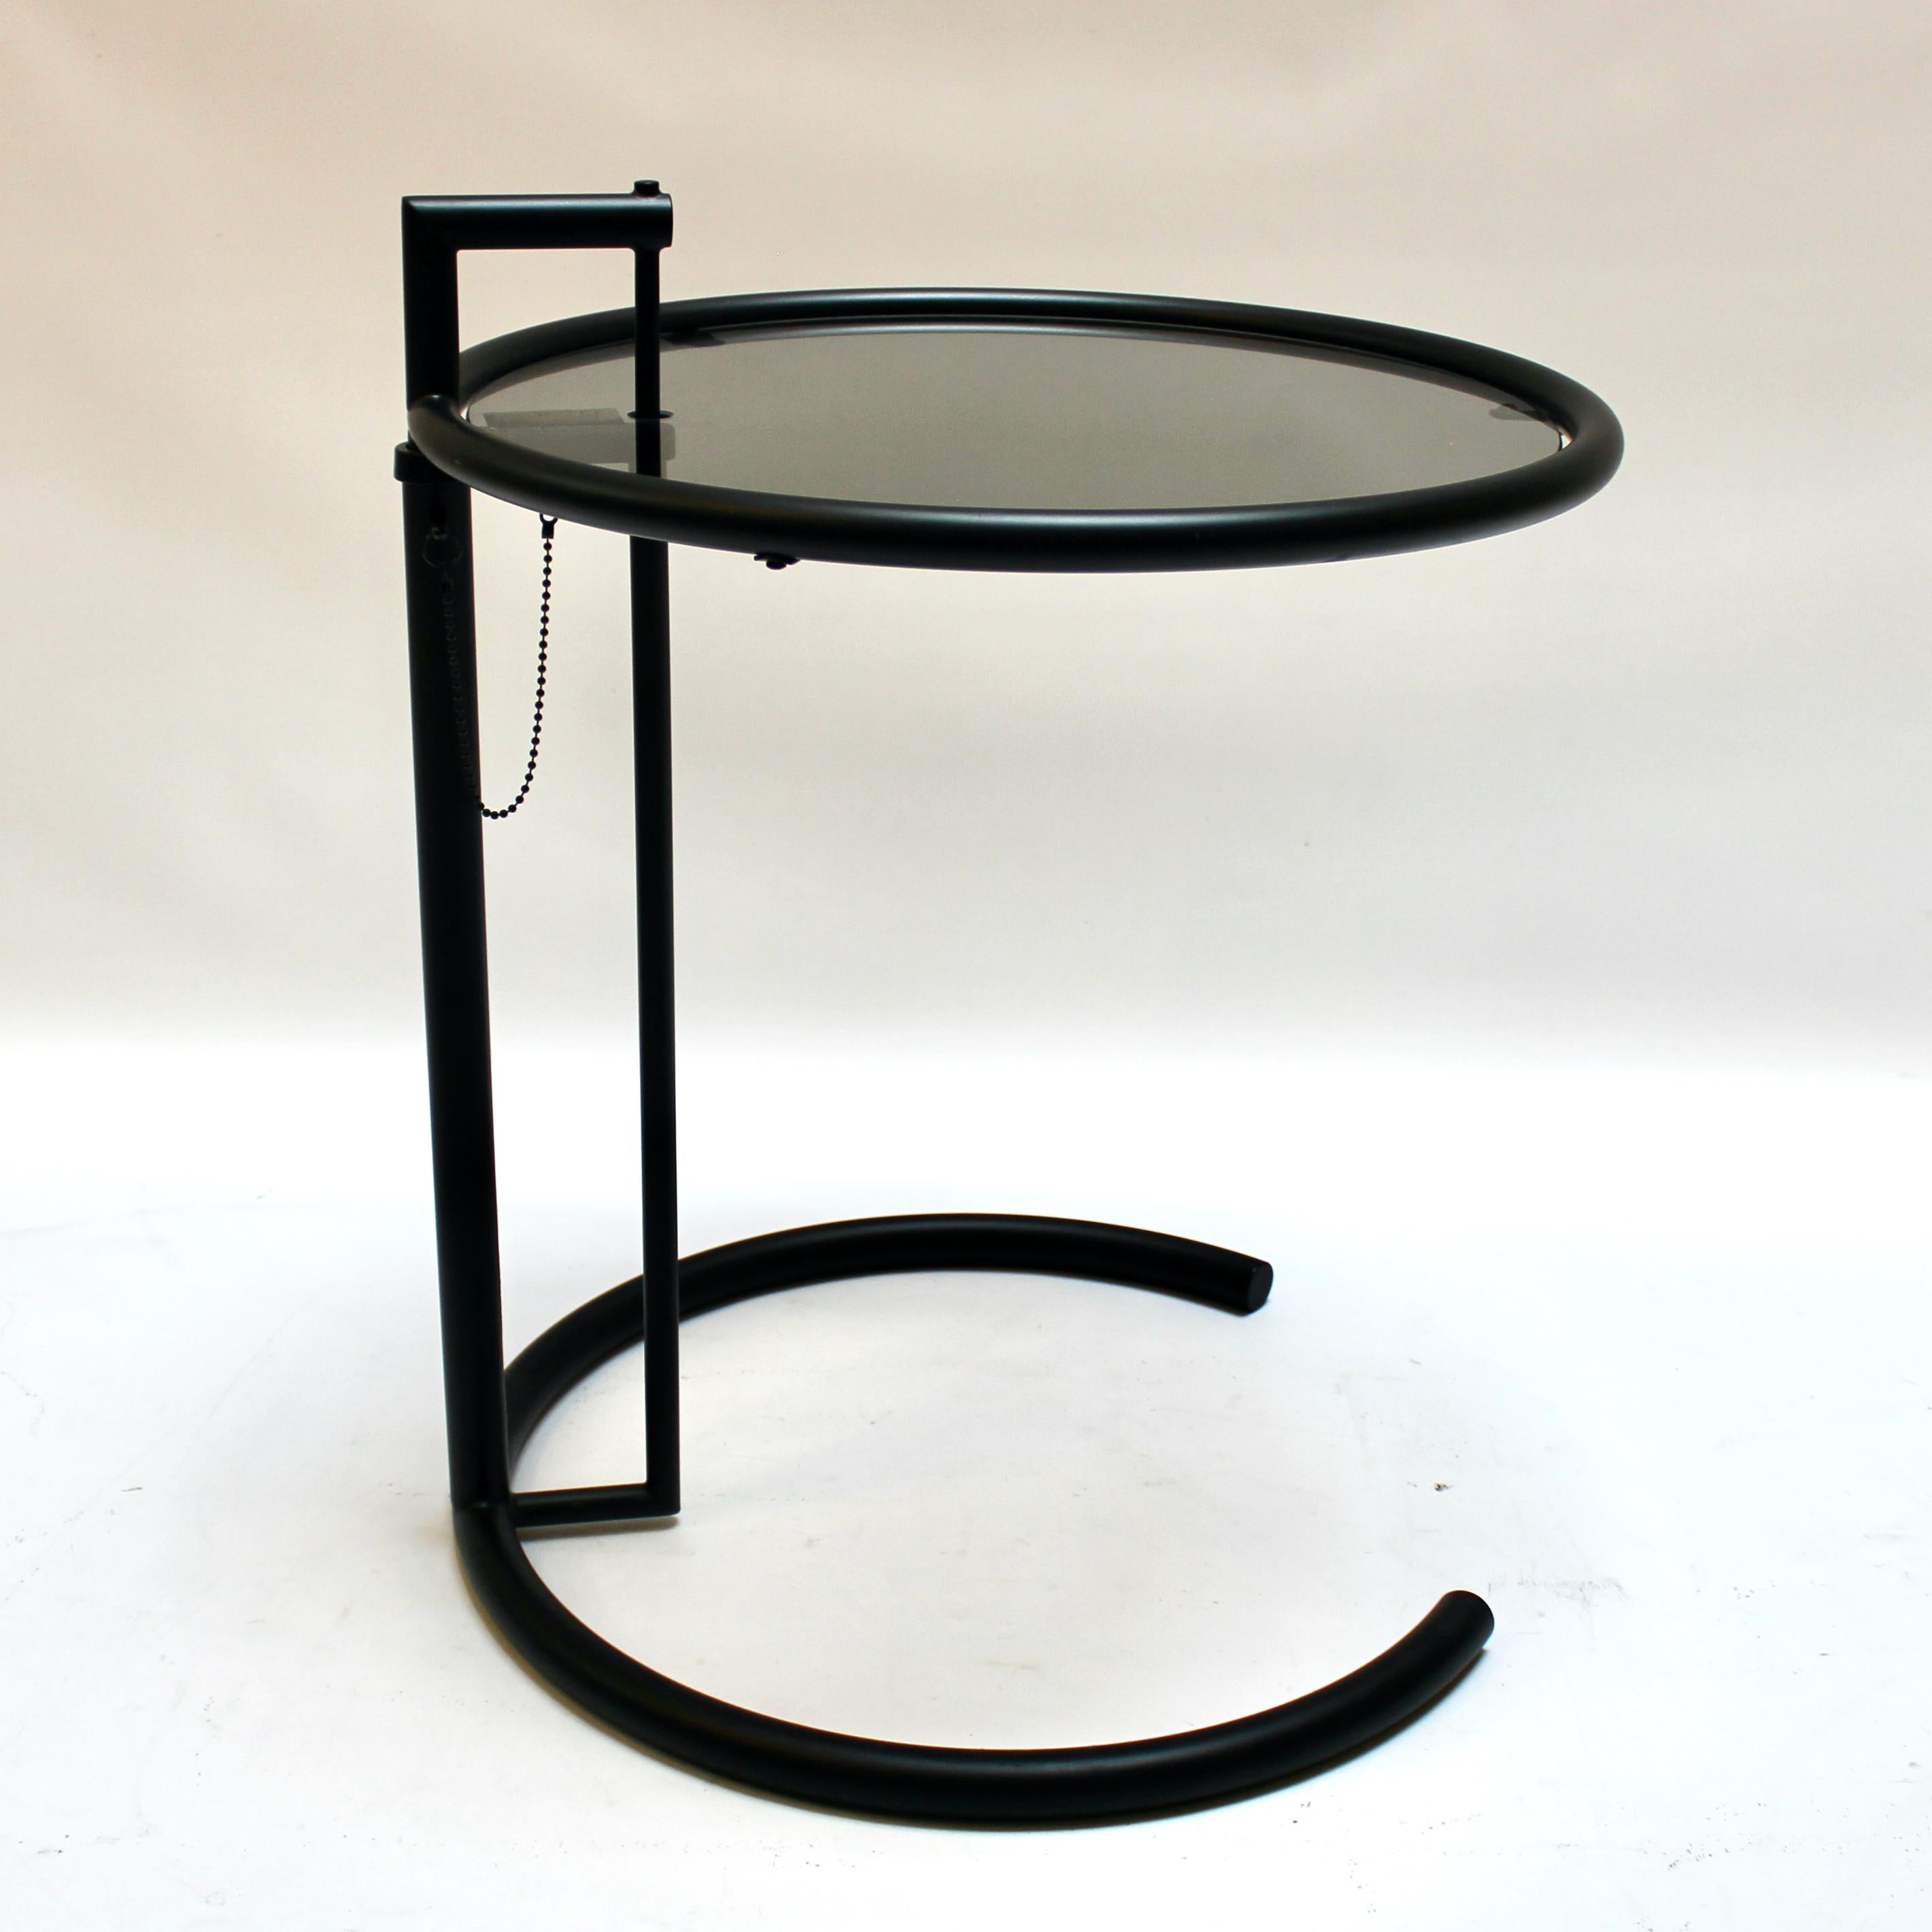 Italian Eileen Gray E1027 Adjustable Side Table by ClassiCon, Made in Italy For Sale